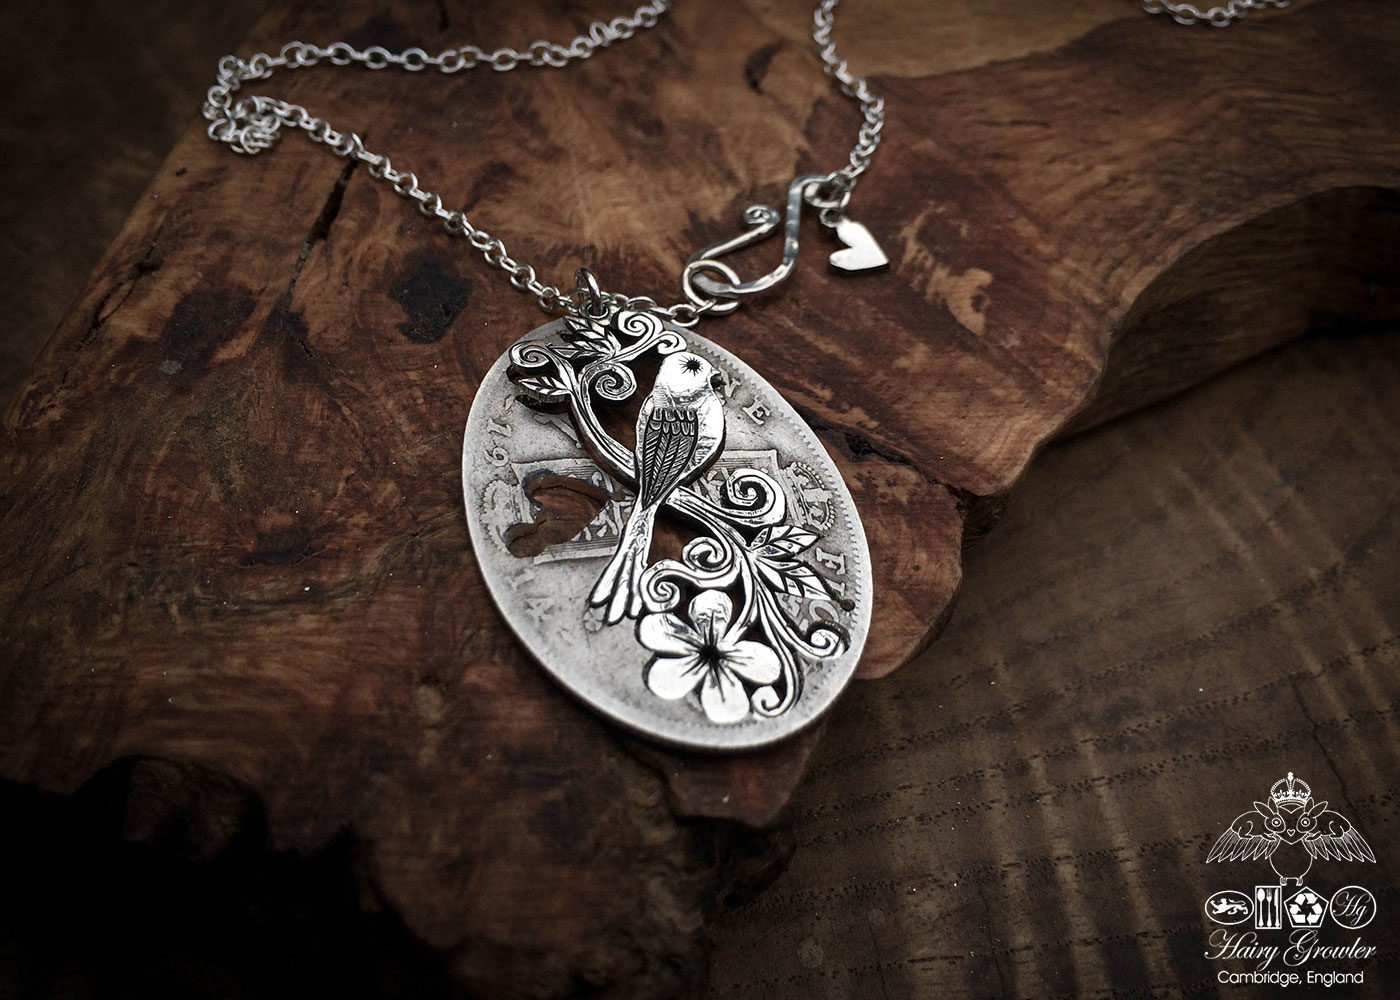 bestival festival necklace - handmade and recycled using silver coins